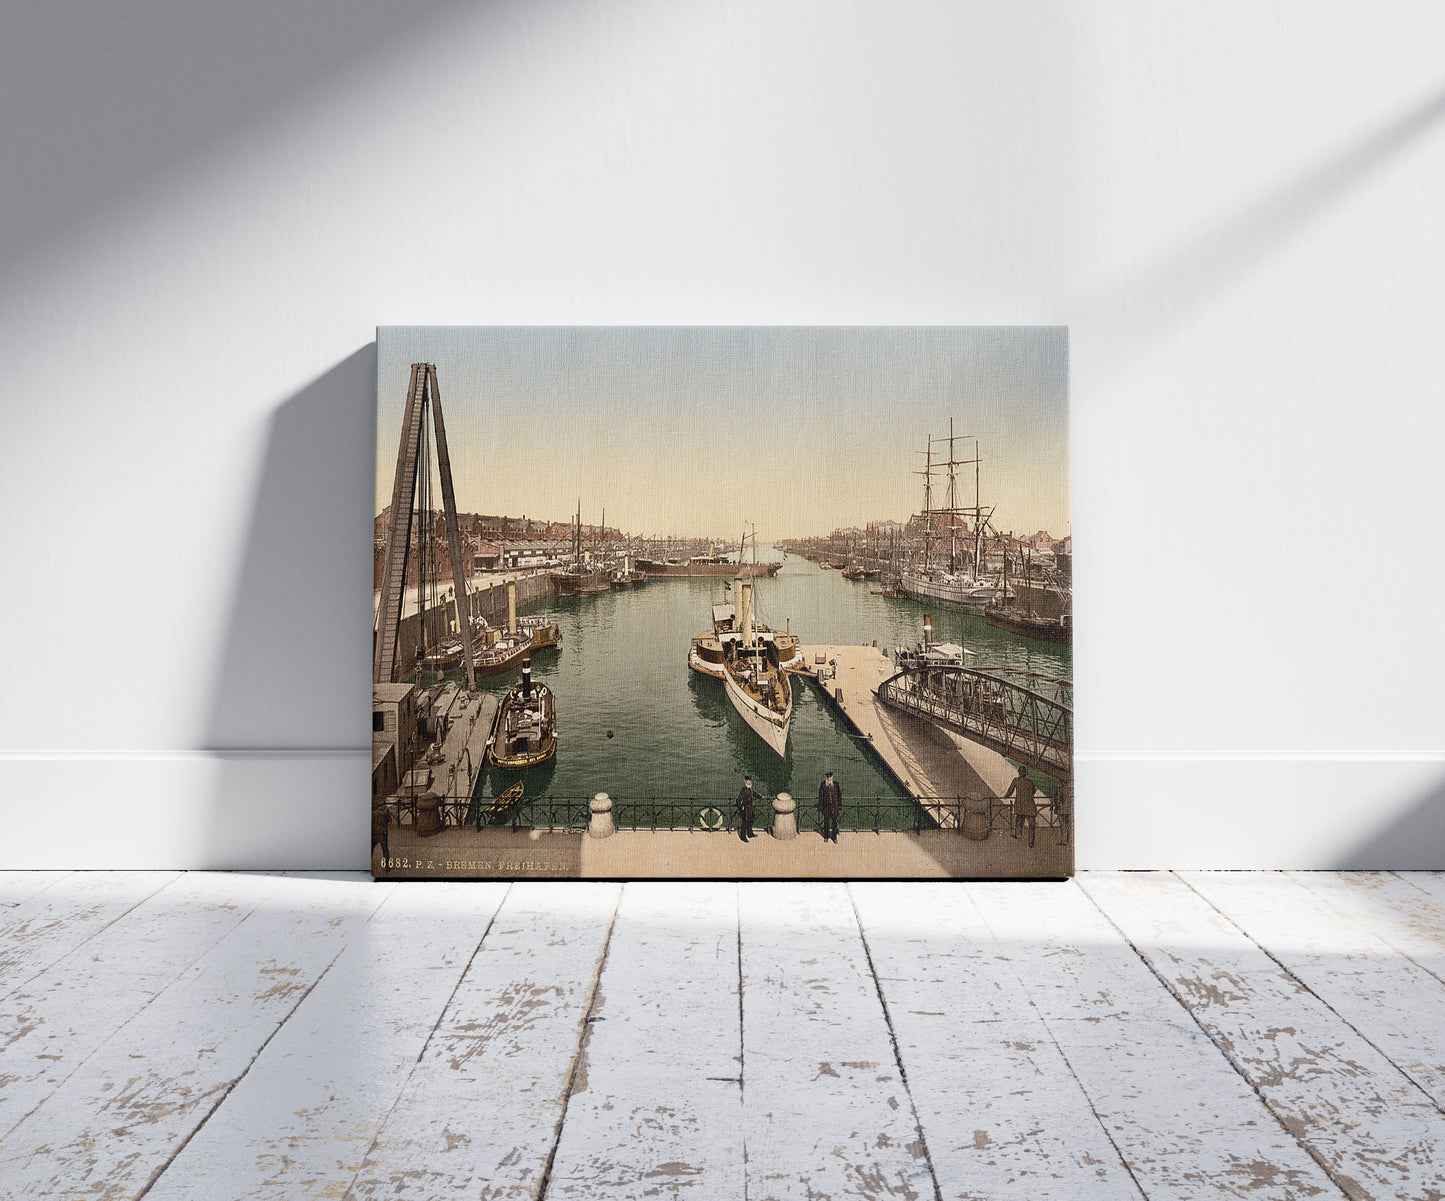 A picture of The Harbor (Free Port), Bremen, Germany